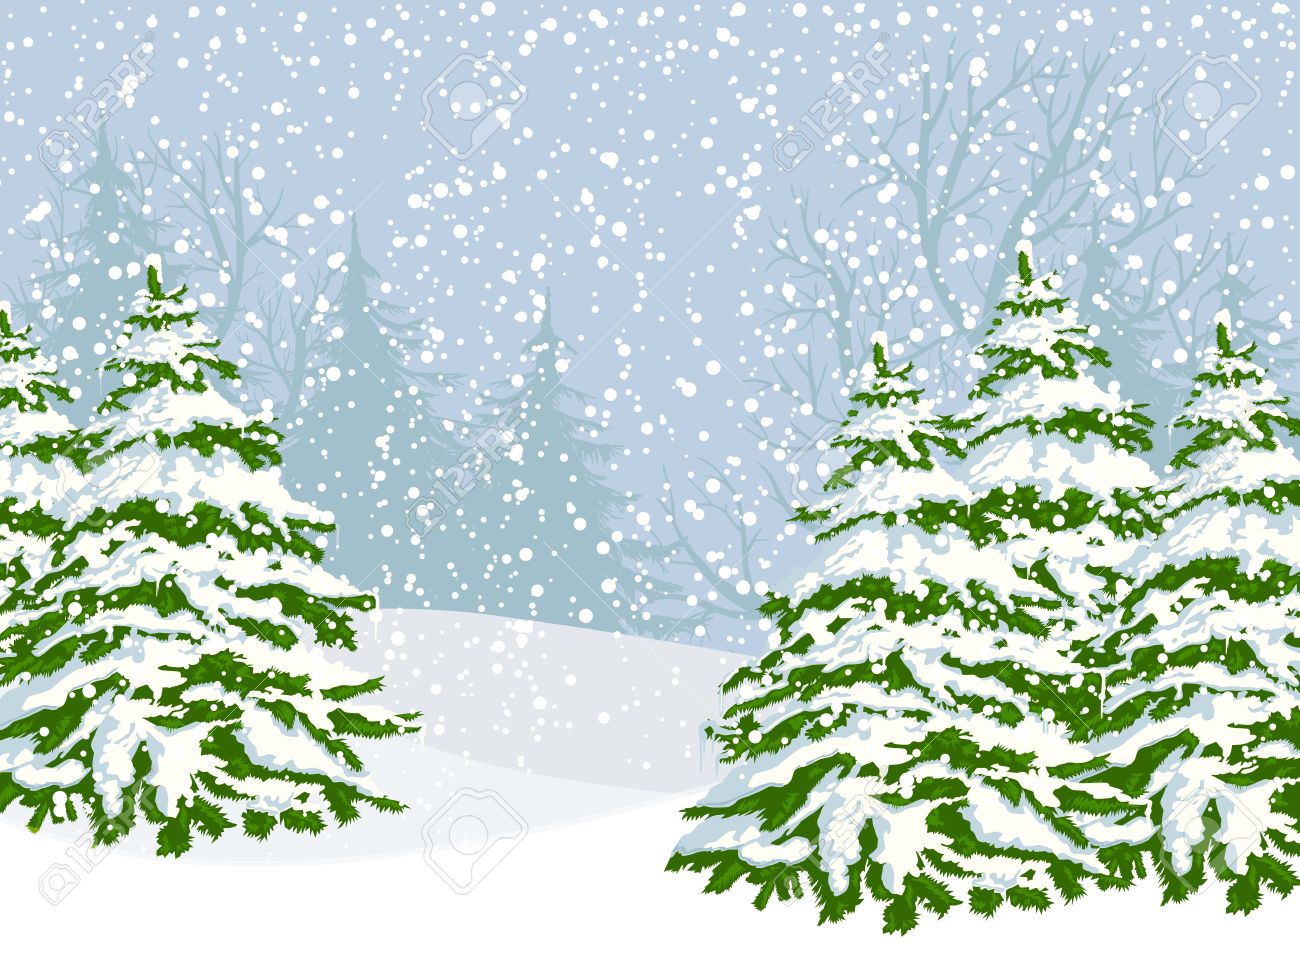 Snow forest clipart.